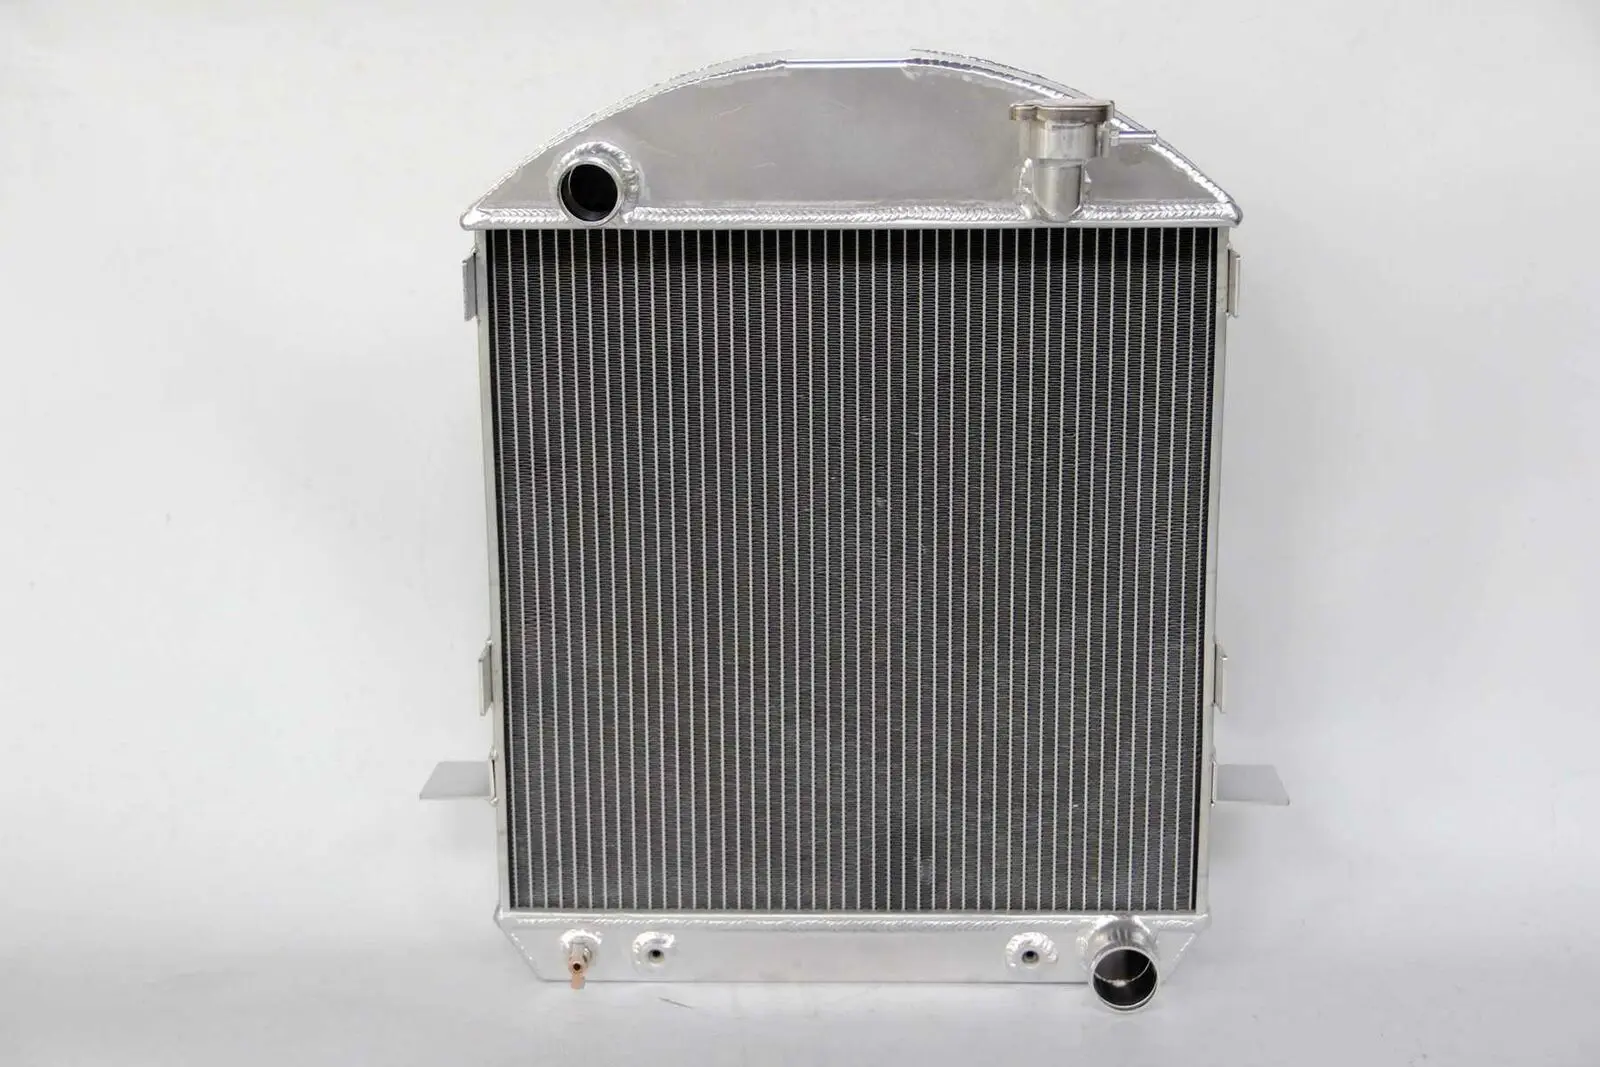 

3 Row Aluminum Radiator For 1917-1927 Ford Model T-Bucket With Chevy Engine 1918 1919 1920 1921 1922 1923 1924 1925 1926 1927